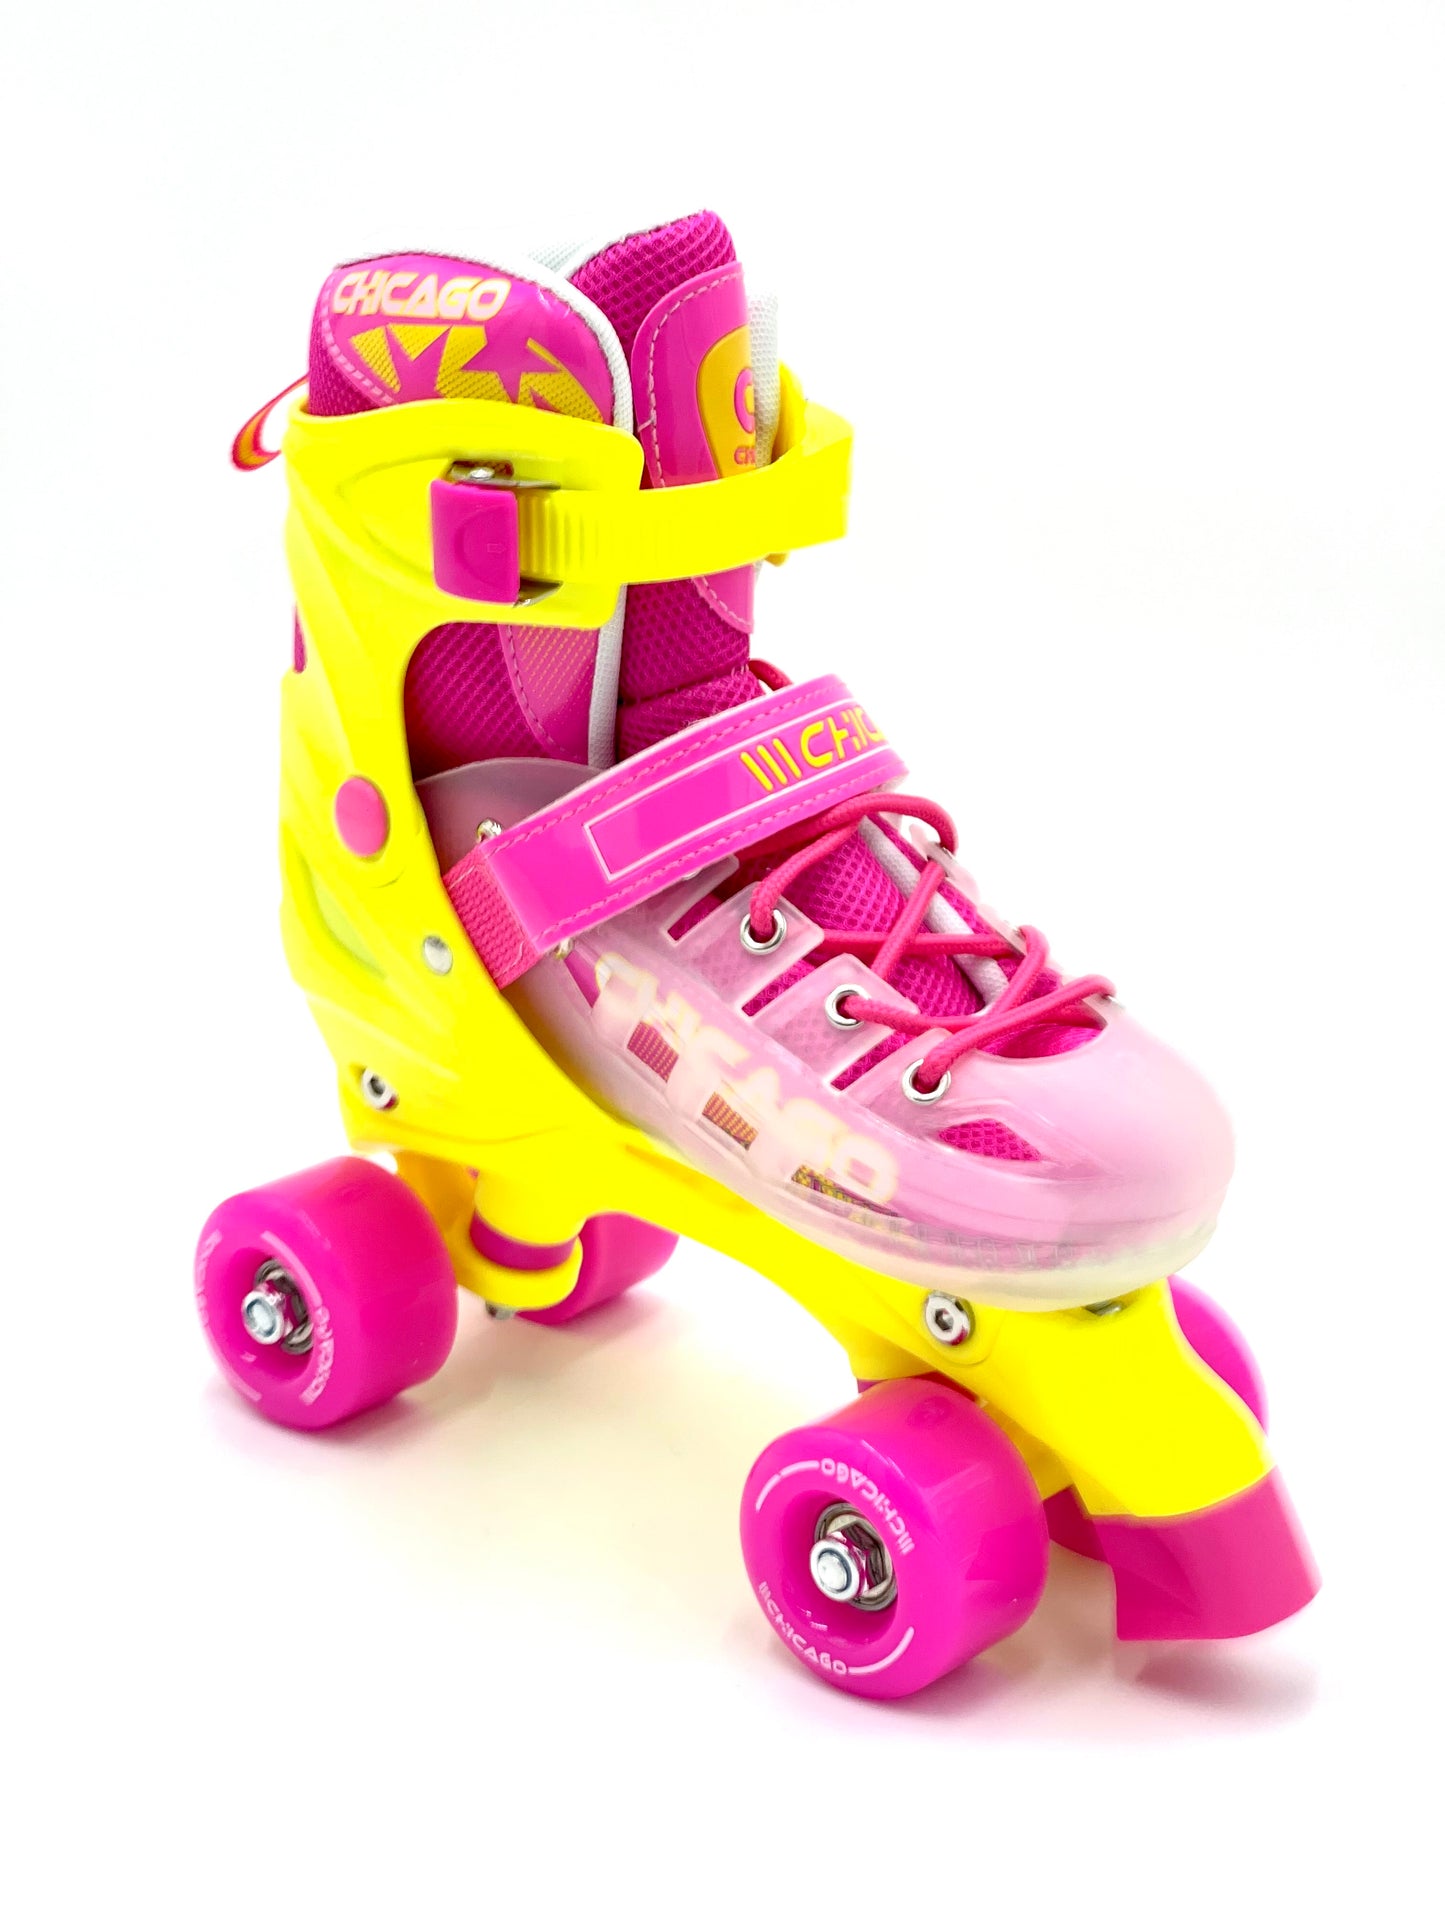 Chicago 3 in 1 Fitness Quad Ice Skates Pink Yellow